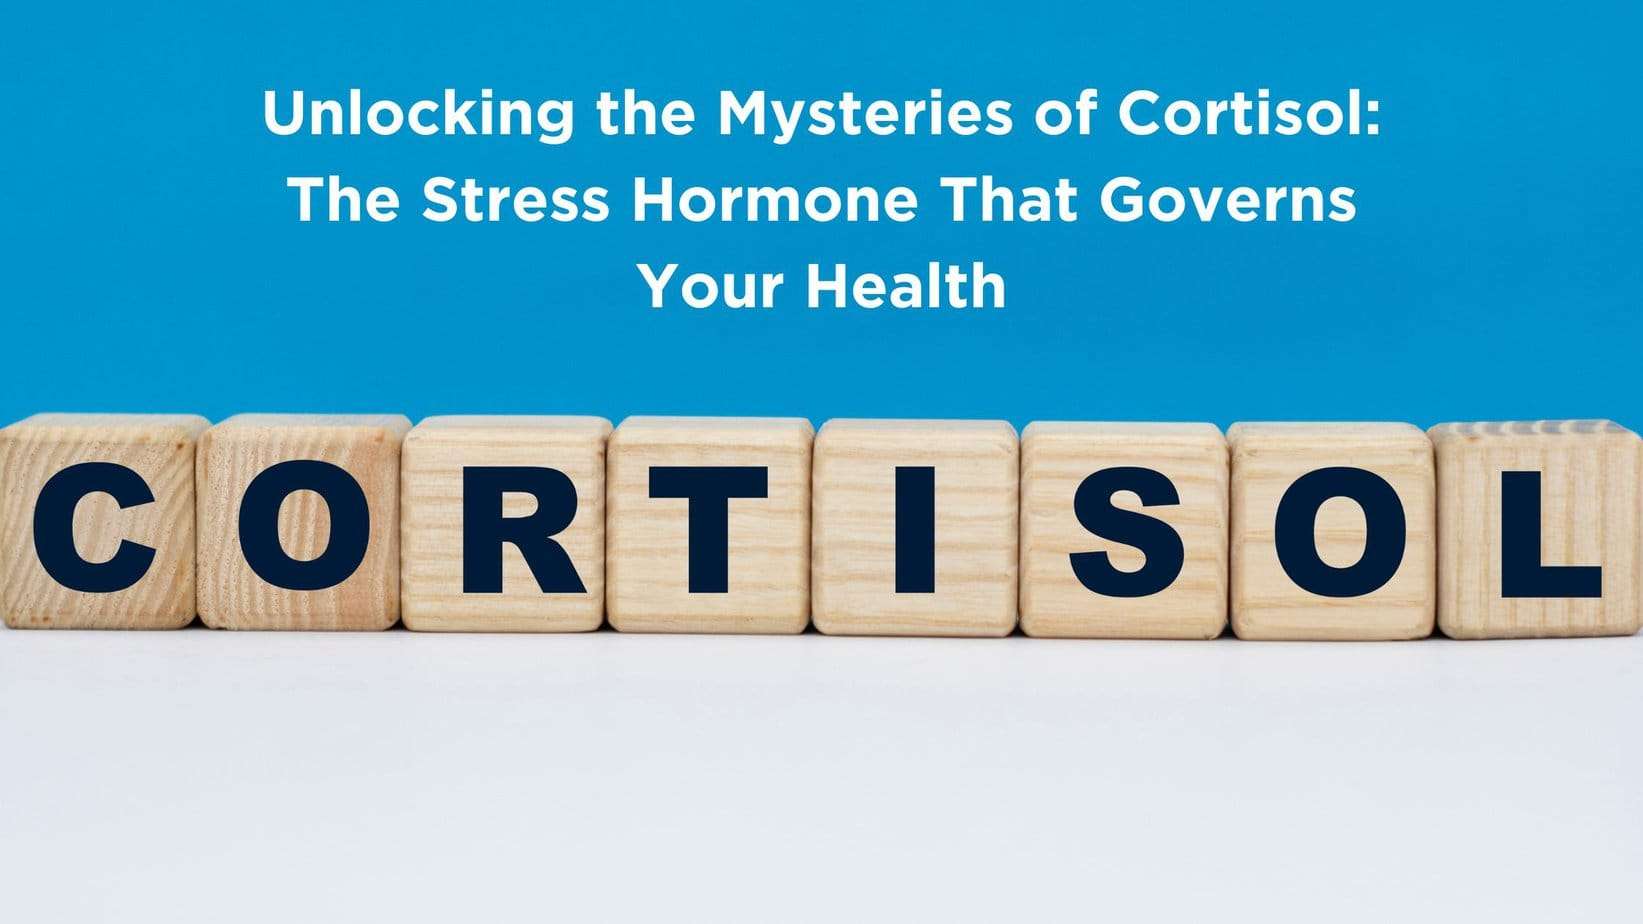 Cortisol spelled out in wood blocks on a blue background, representing the hormone's complex role in the body. With Text on the image that reads.<br />
Unlocking the Mysteries of Cortisol: The Stress Hormone That Governs Your Health 